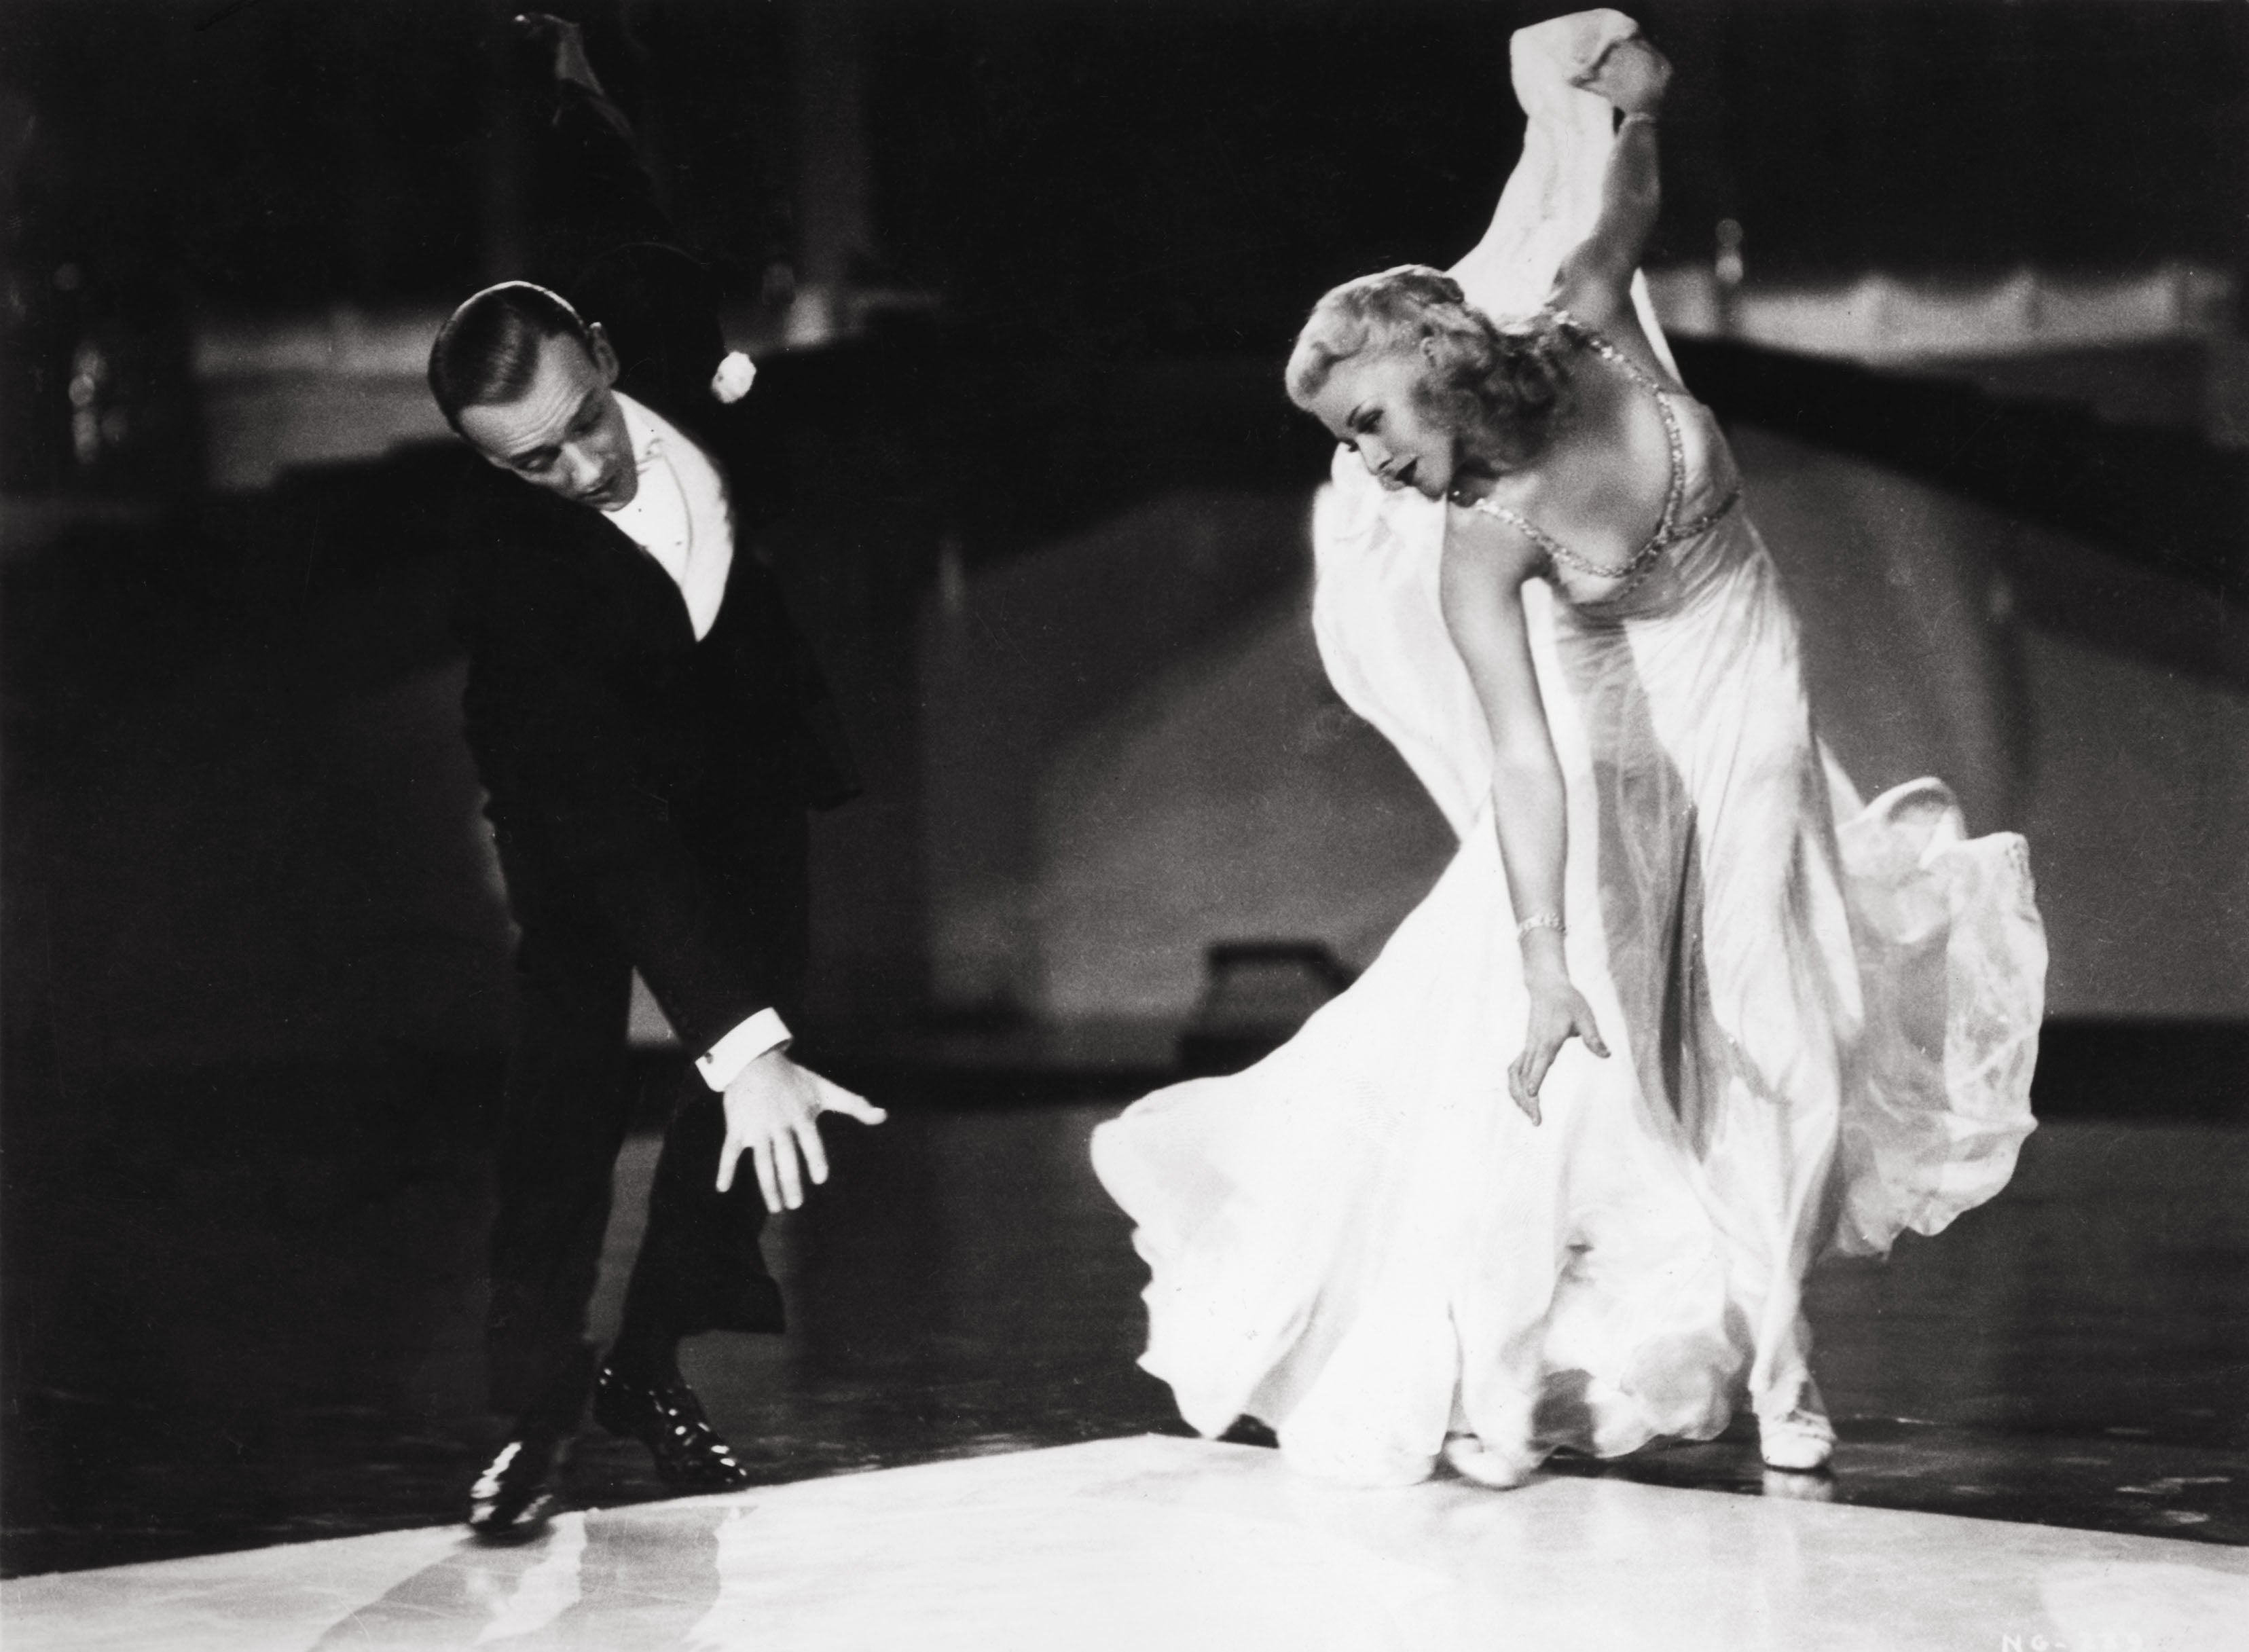 Fred Astaire and Ginger Rogers in ‘Swing Time’ from 1936